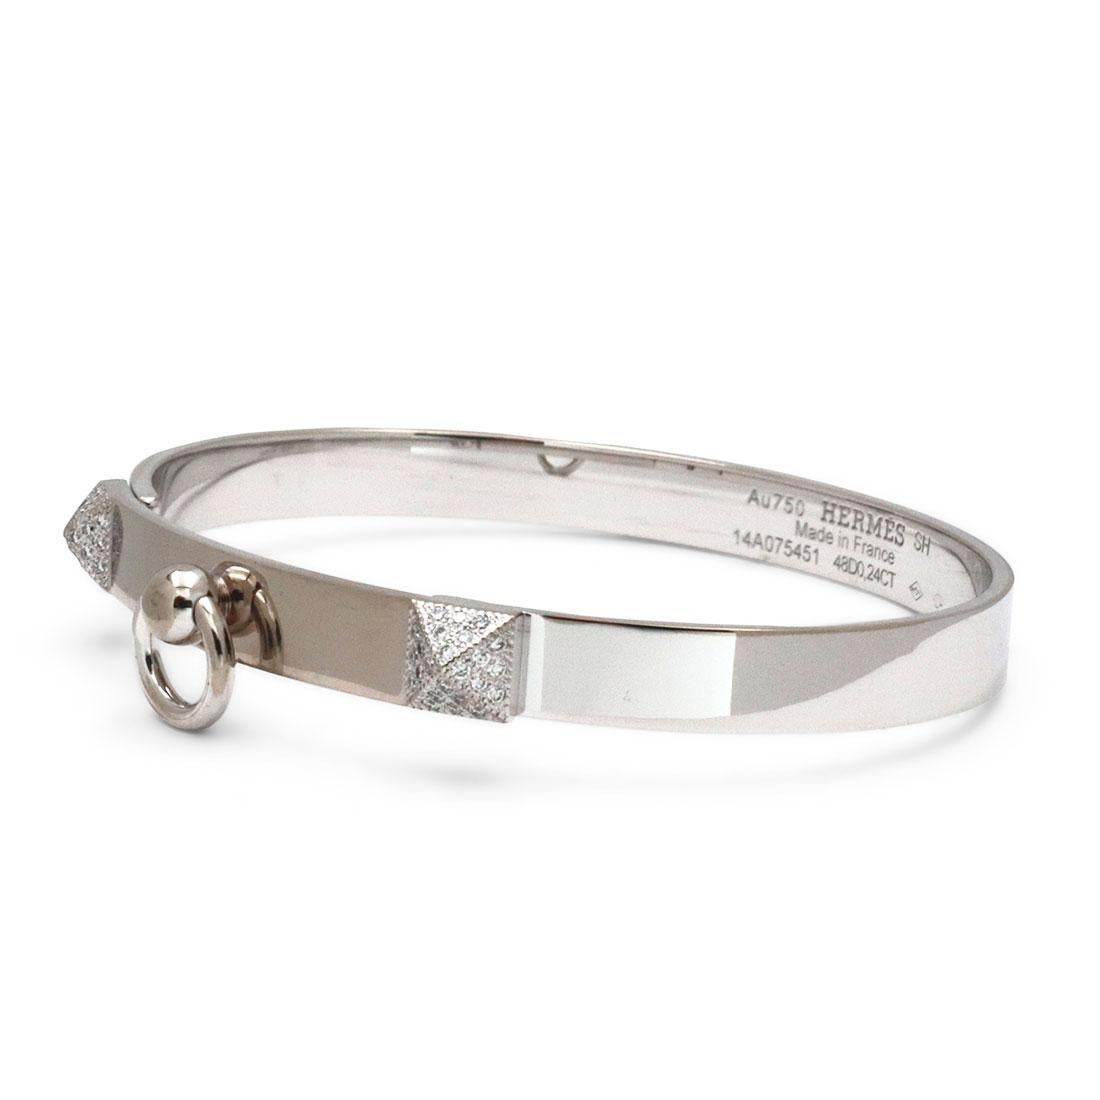 Authentic Hermès 'Collier de Chien' bracelet crafted in 18k white gold. Set with round brilliant cut diamonds on each end with a total carat weight of 0.24. Will fit up to a 5 1/2 inch wrist. Signed Hermes, AU750, SH, Made in France, with serial